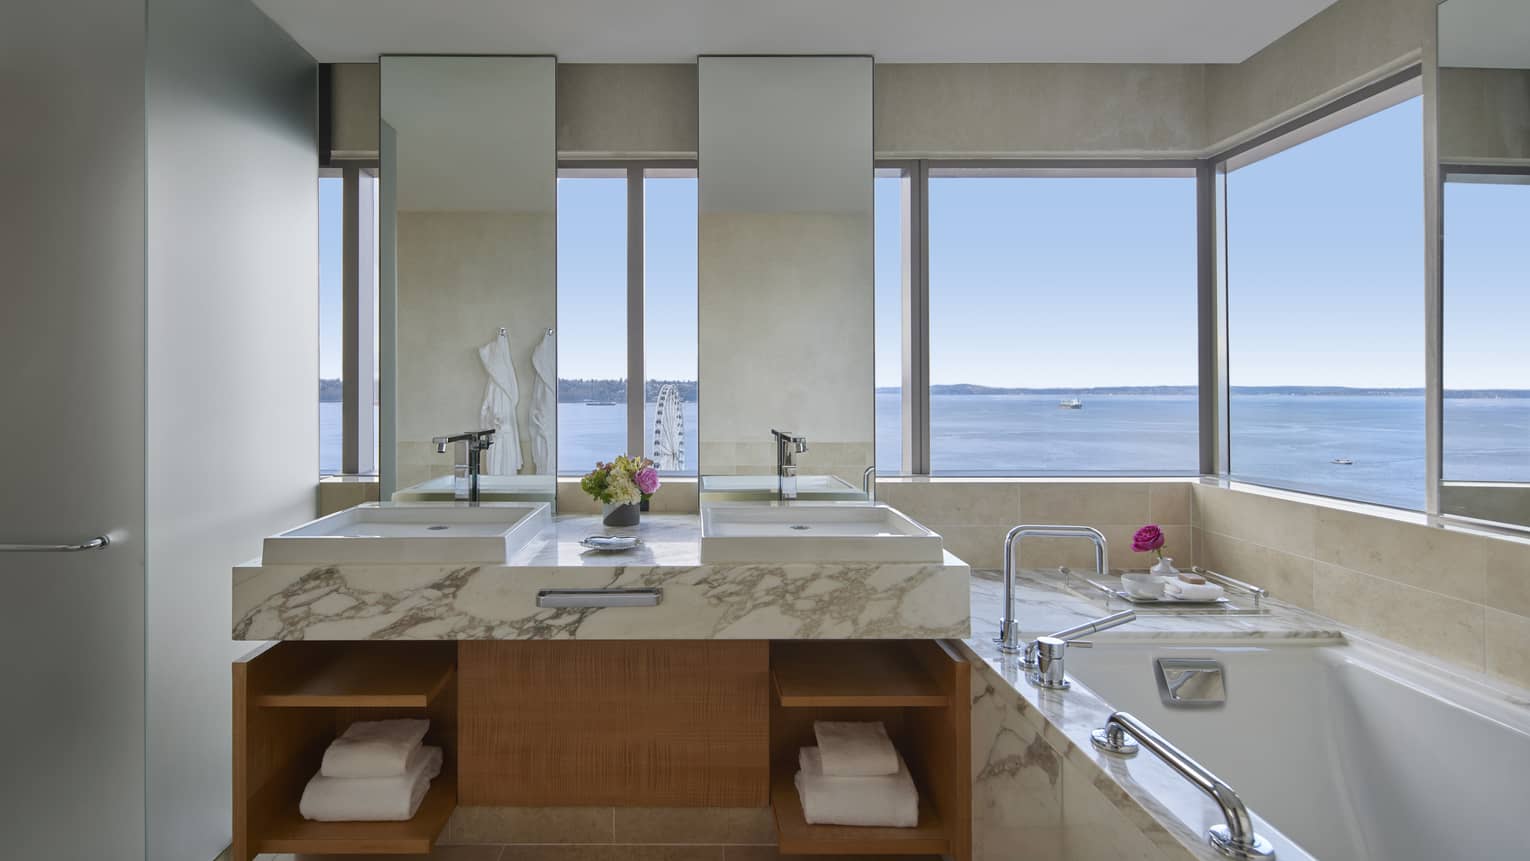 Bathroom with marble double vanity, sunken tub and wrap-around wall of windows